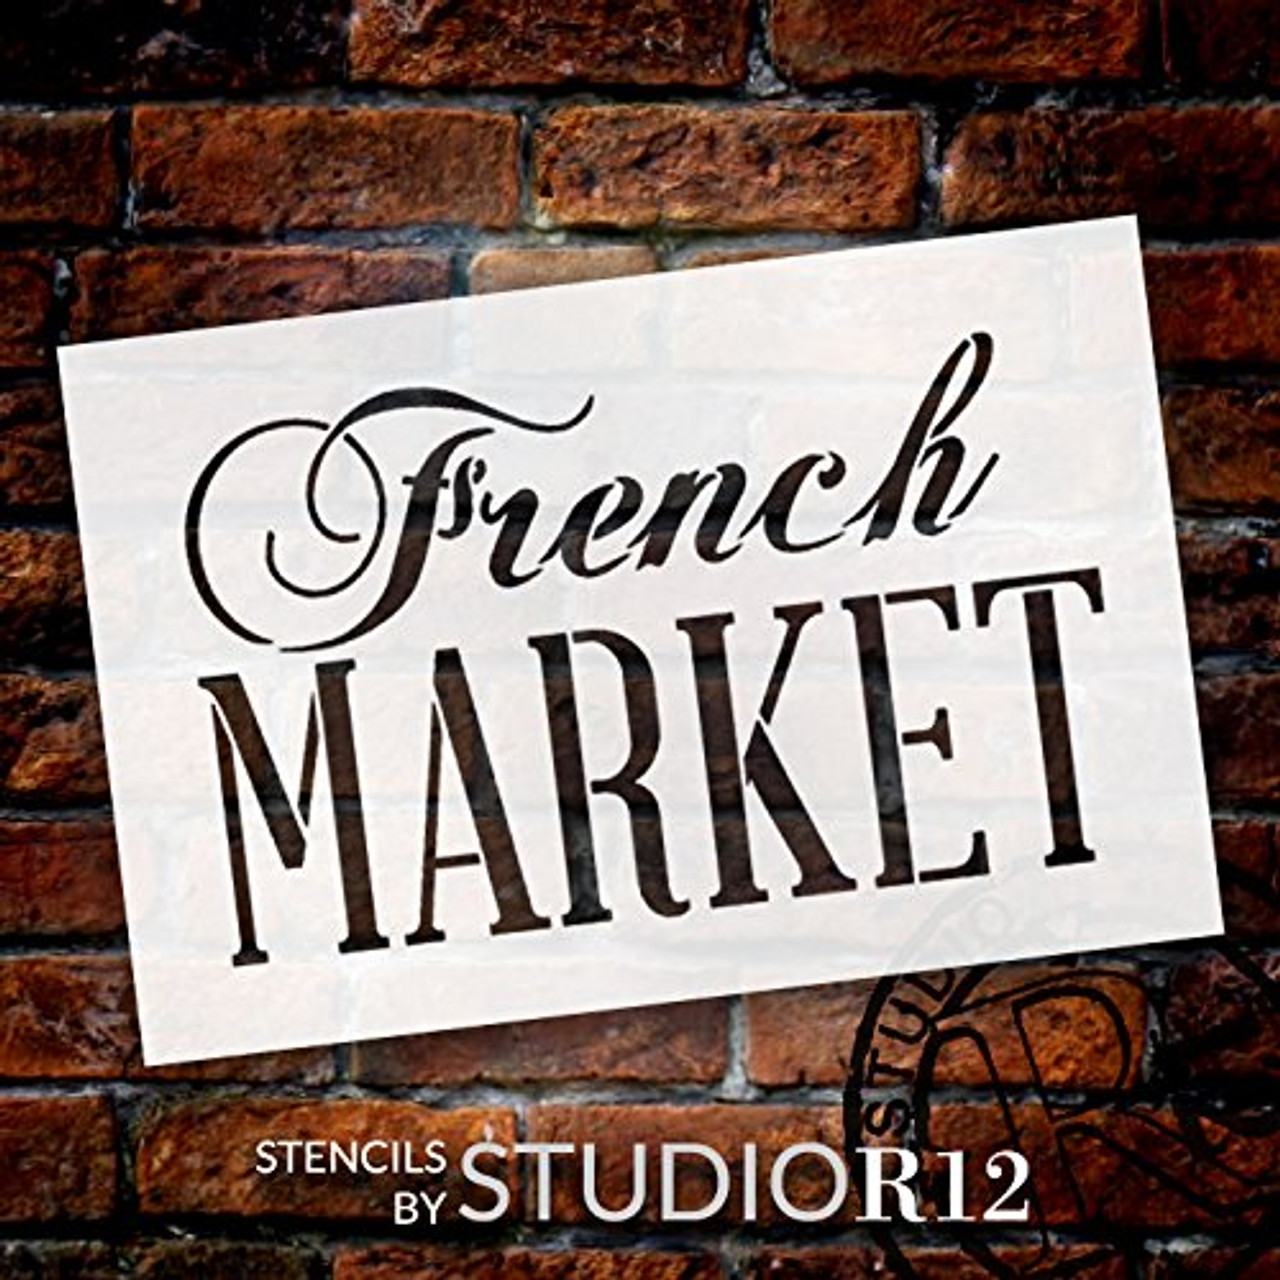 French Market Word Stencil by StudioR12  | Painting, Chalk | Use for Wood Signs, Painted Furniture, Home Decor - 27" x 18" - STCL909_8